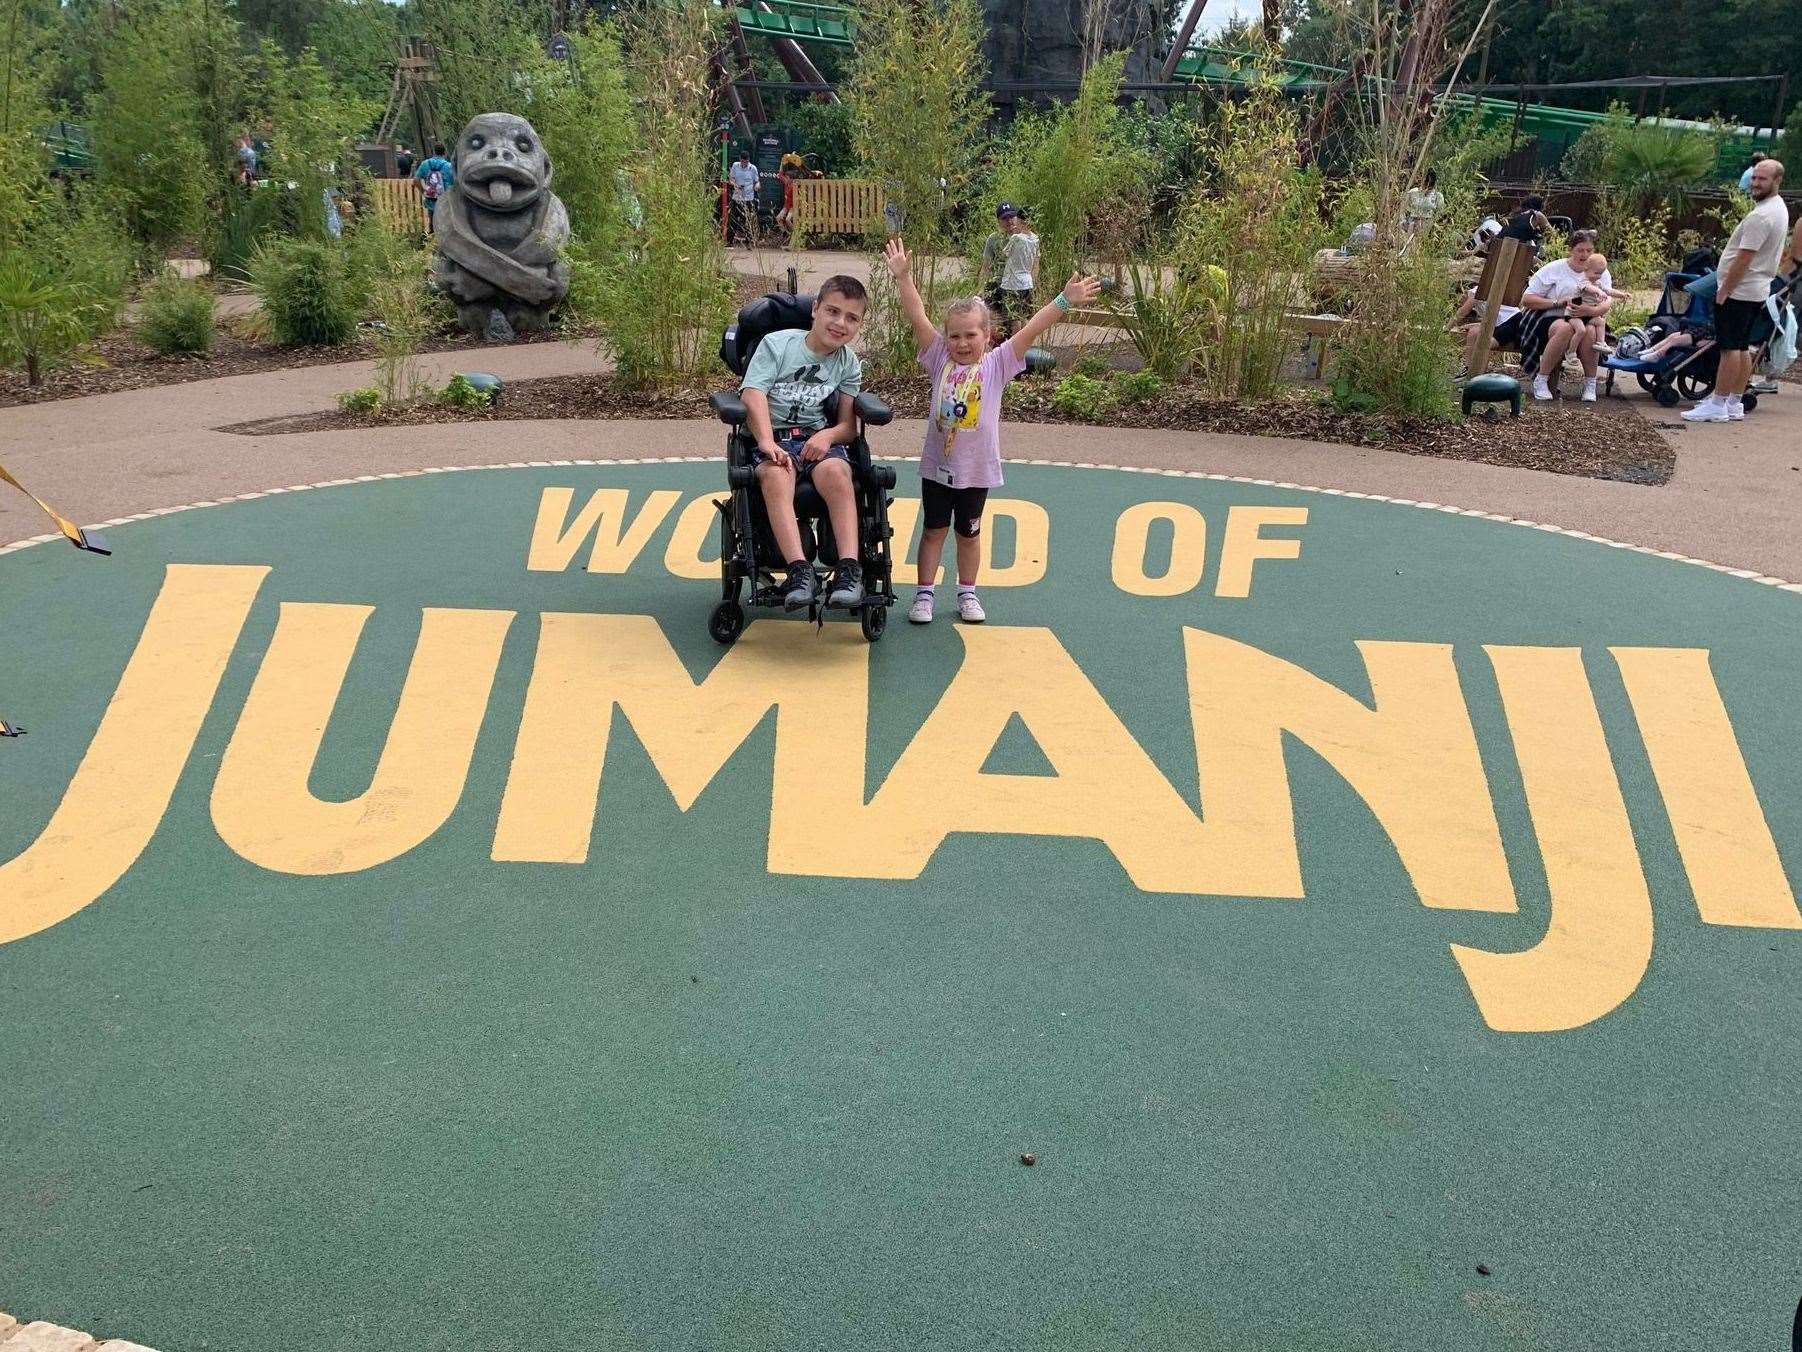 Sonny and sister Keira in the new World of Jumanji at Chessington